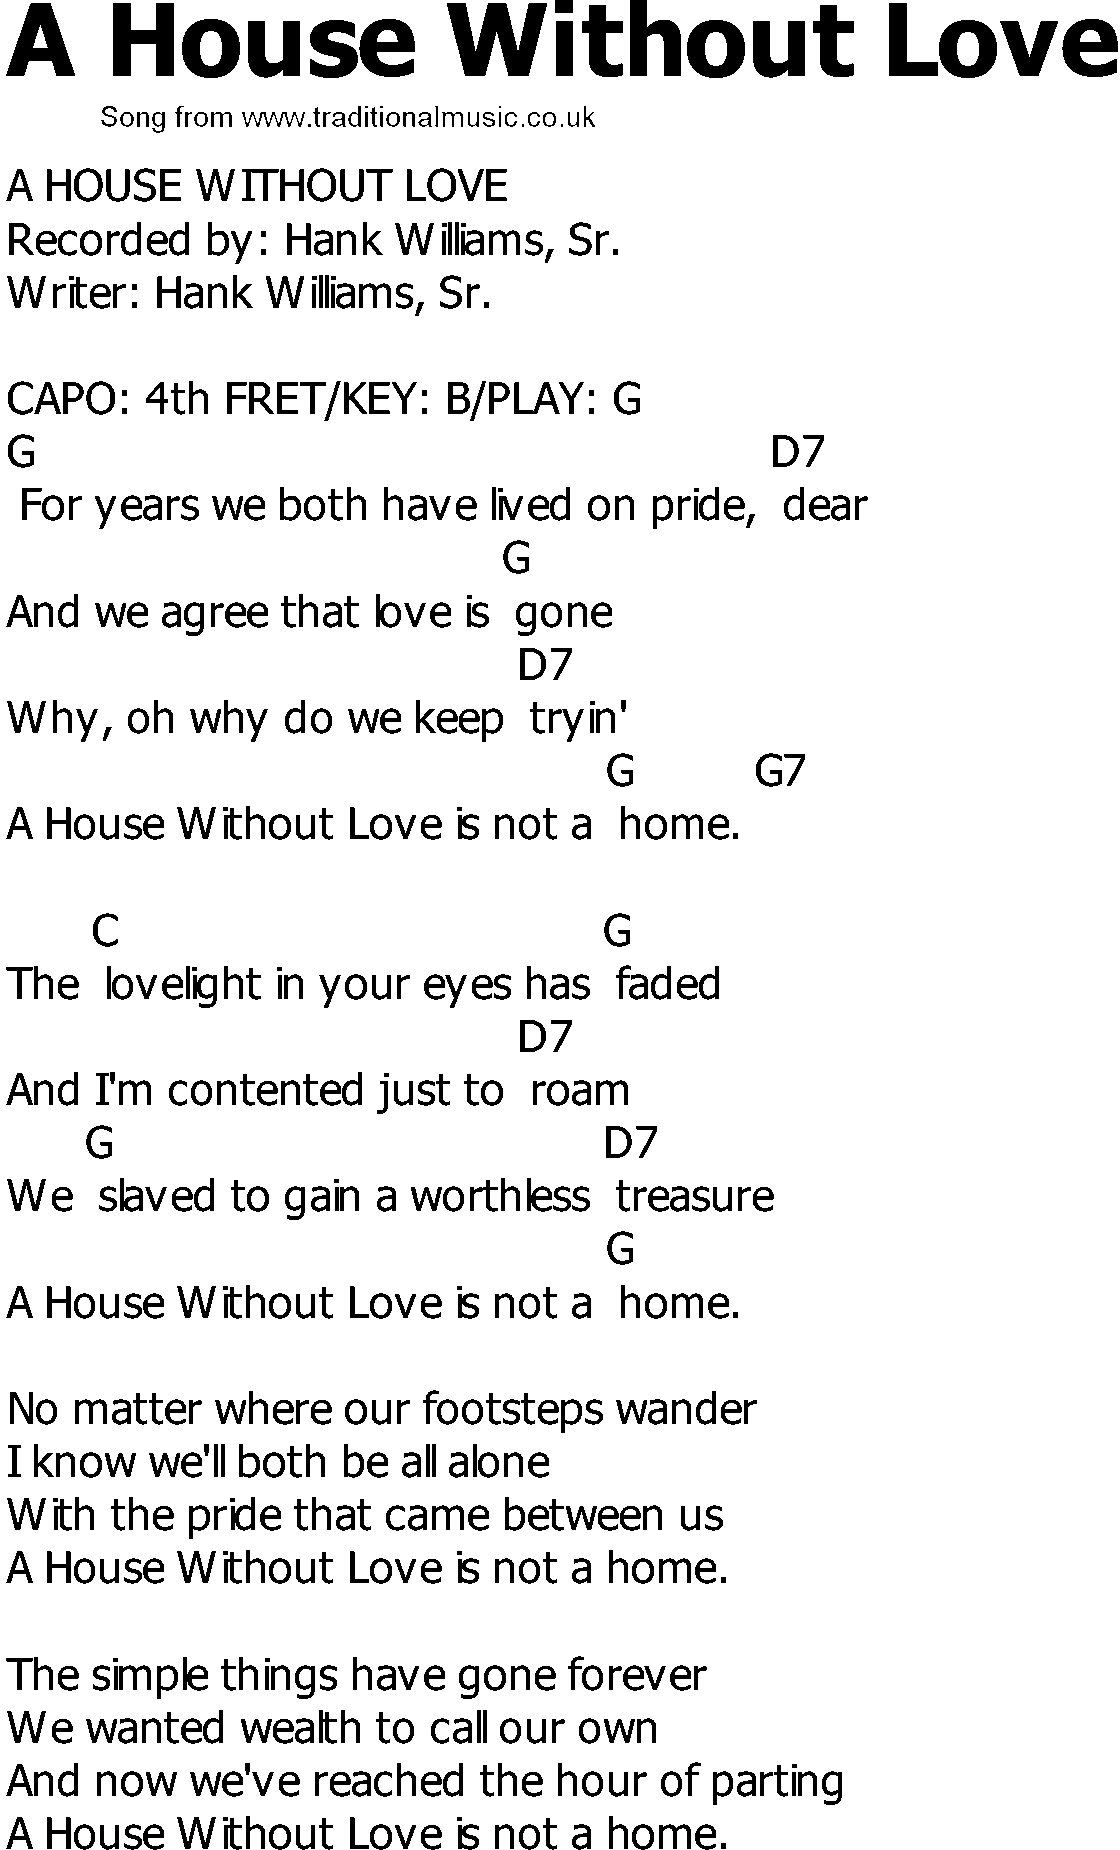 Old Country song lyrics with chords - A House Without Love